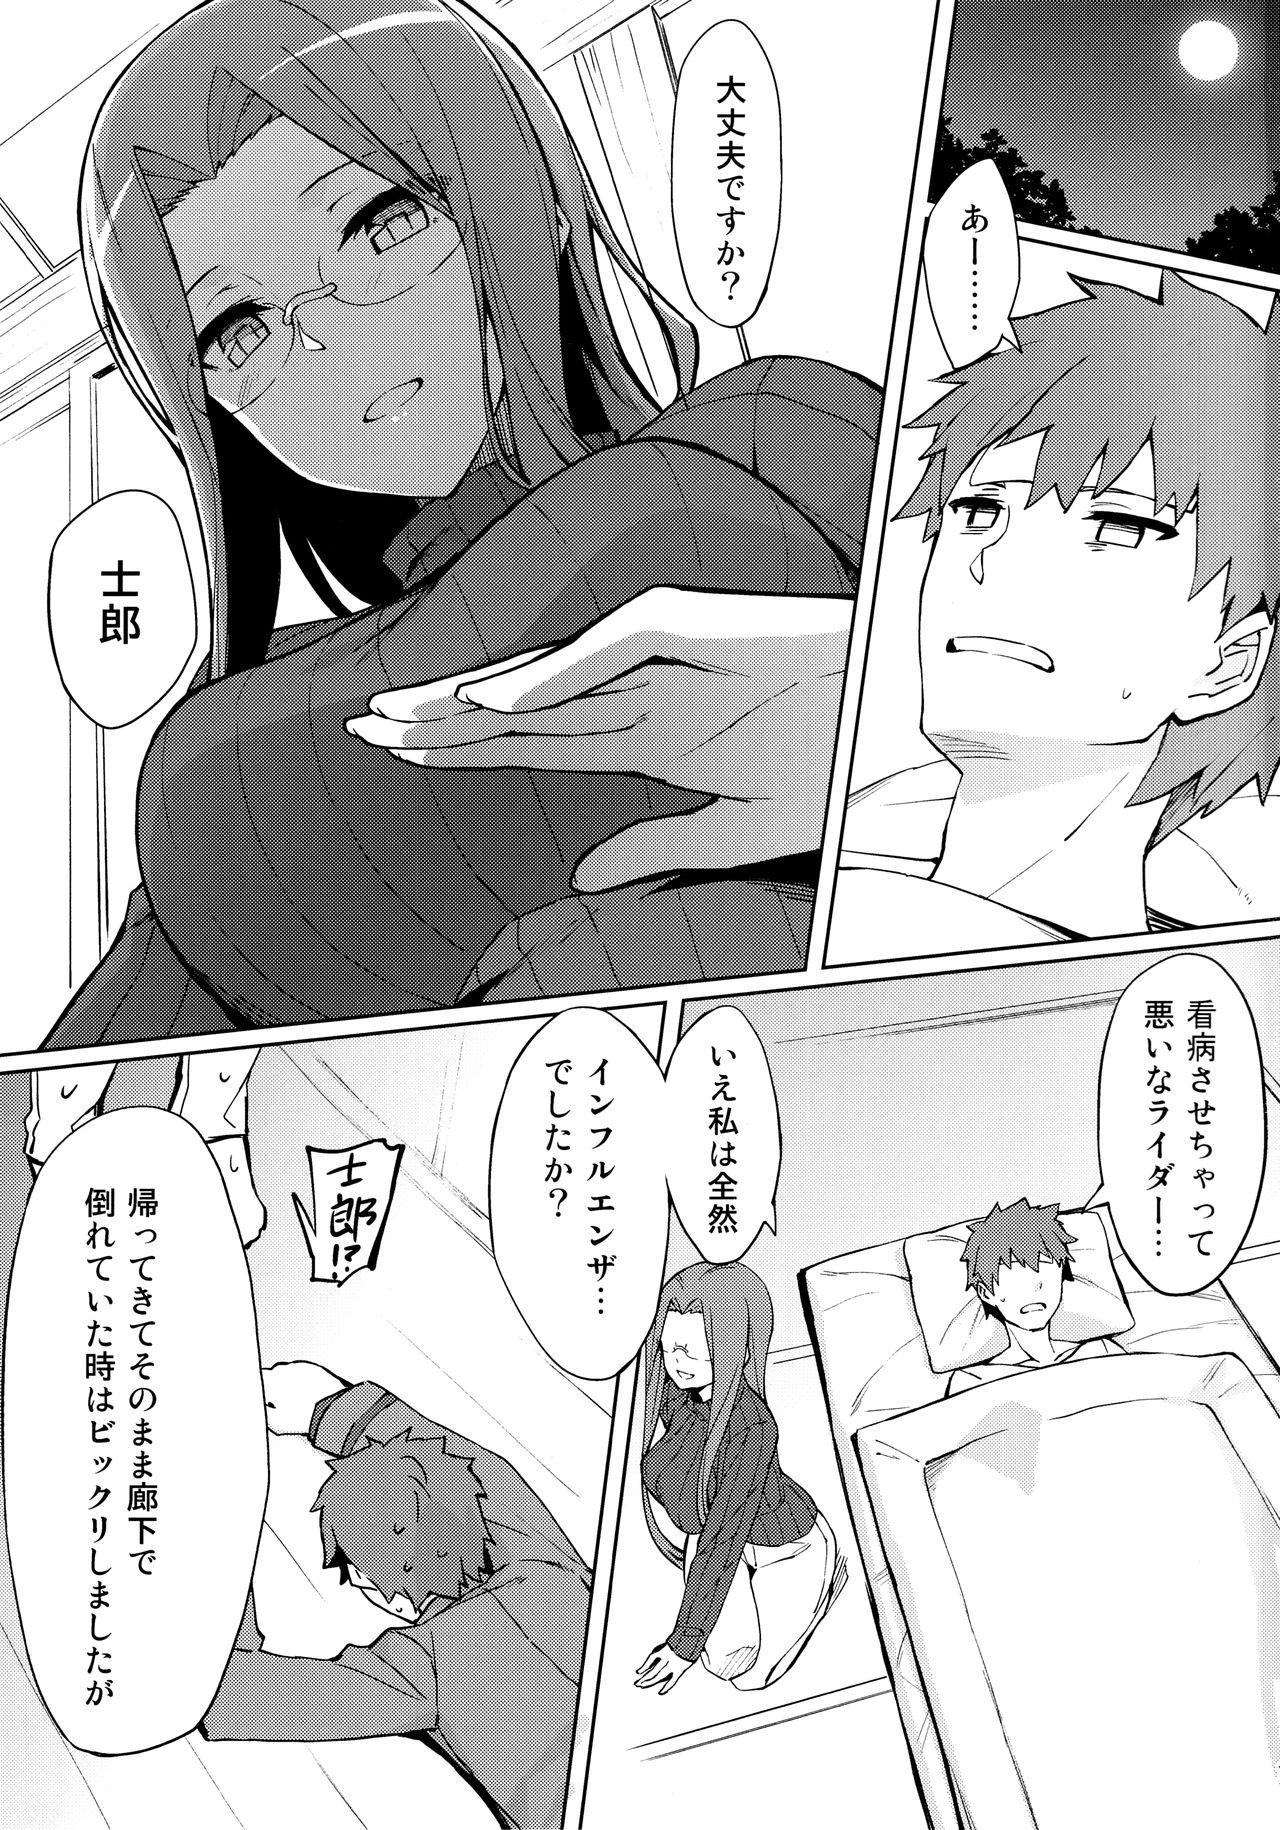 Thick Rider-san no Kanbyou. - Fate stay night Gostosas - Page 2